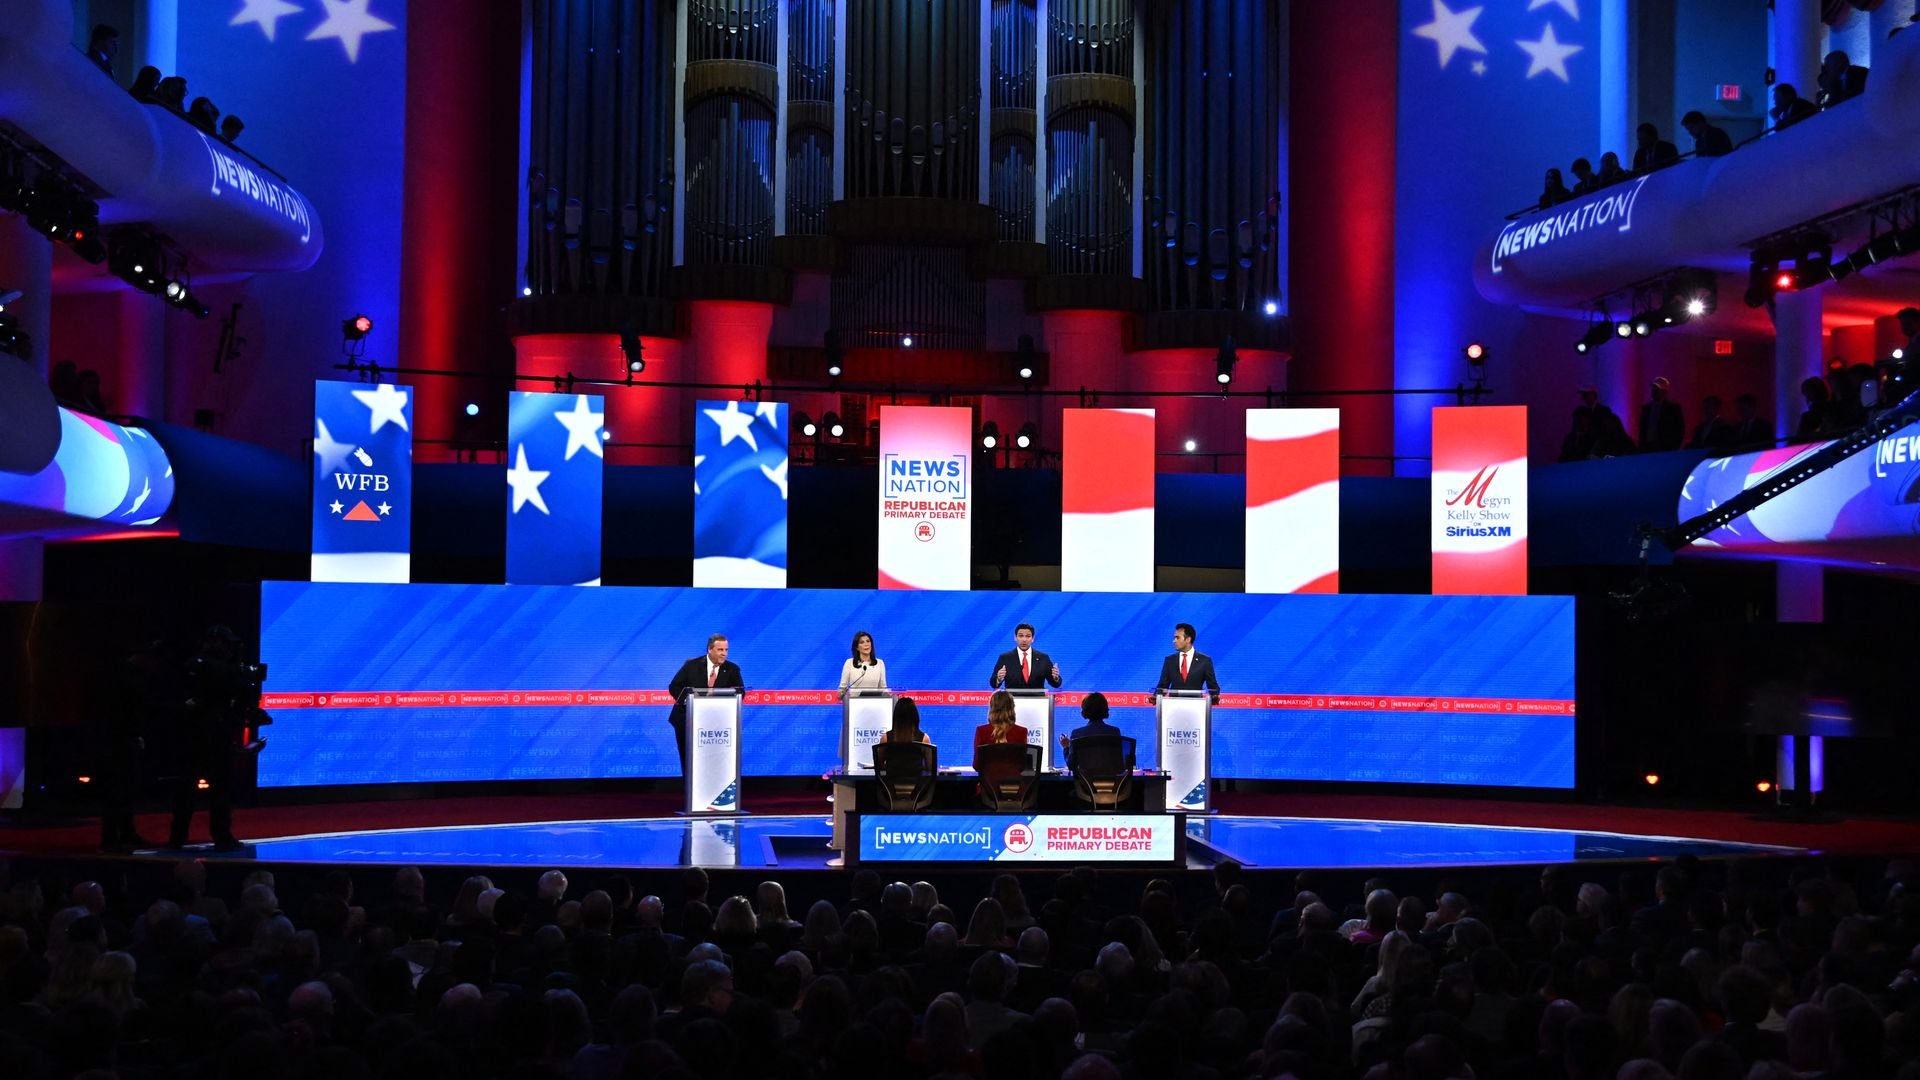 CNN to host two GOP primary debates in January